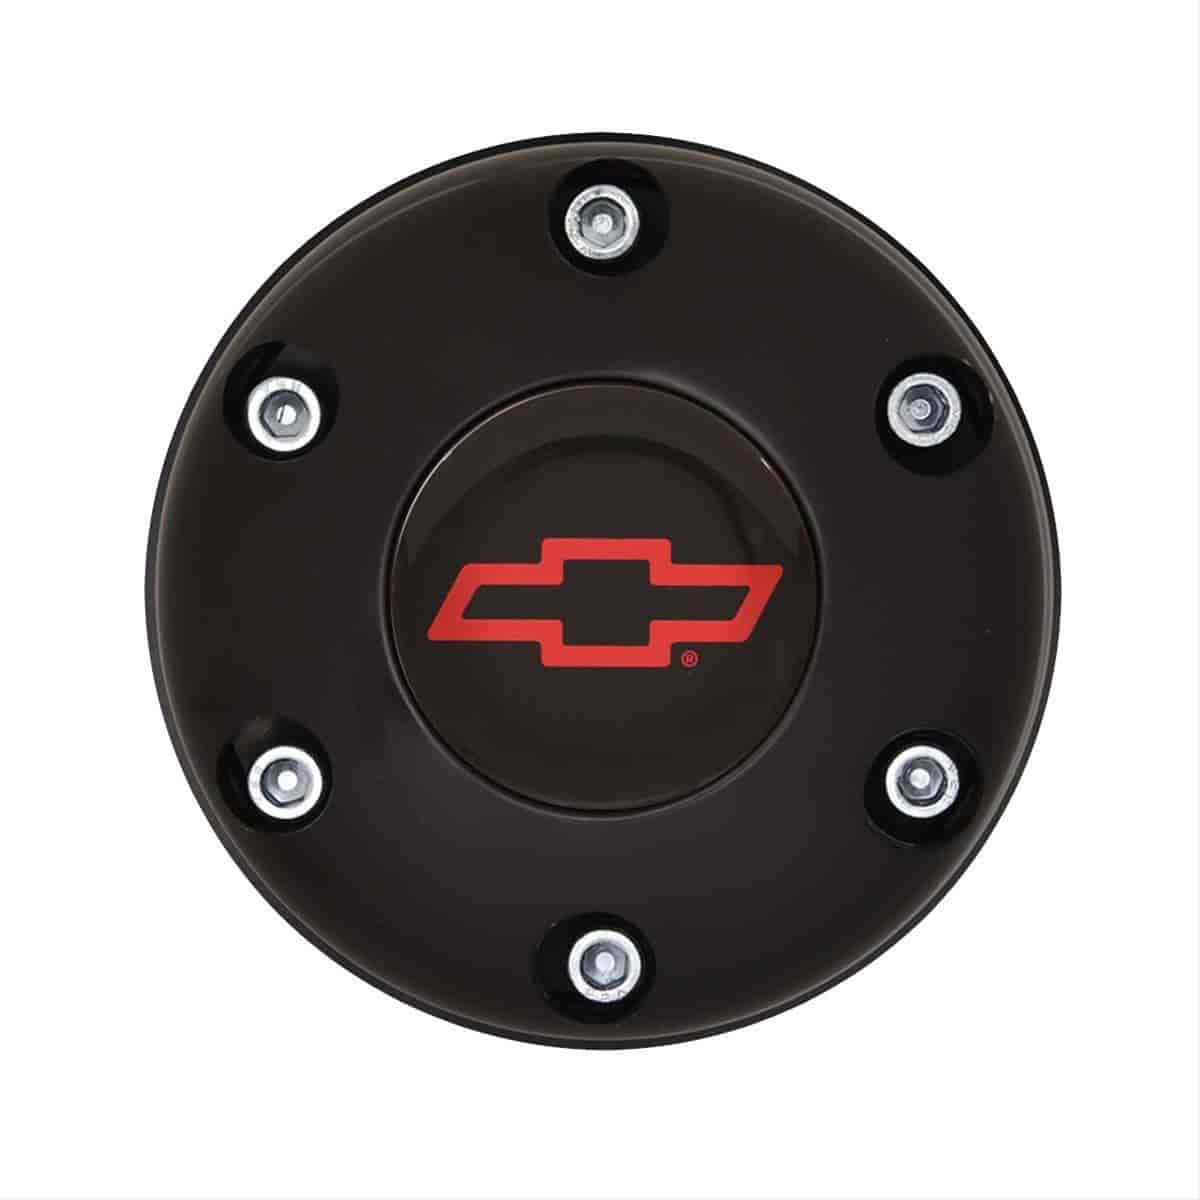 GT3 Gasser/Euro Style Horn Button Chevy Bowtie Colored